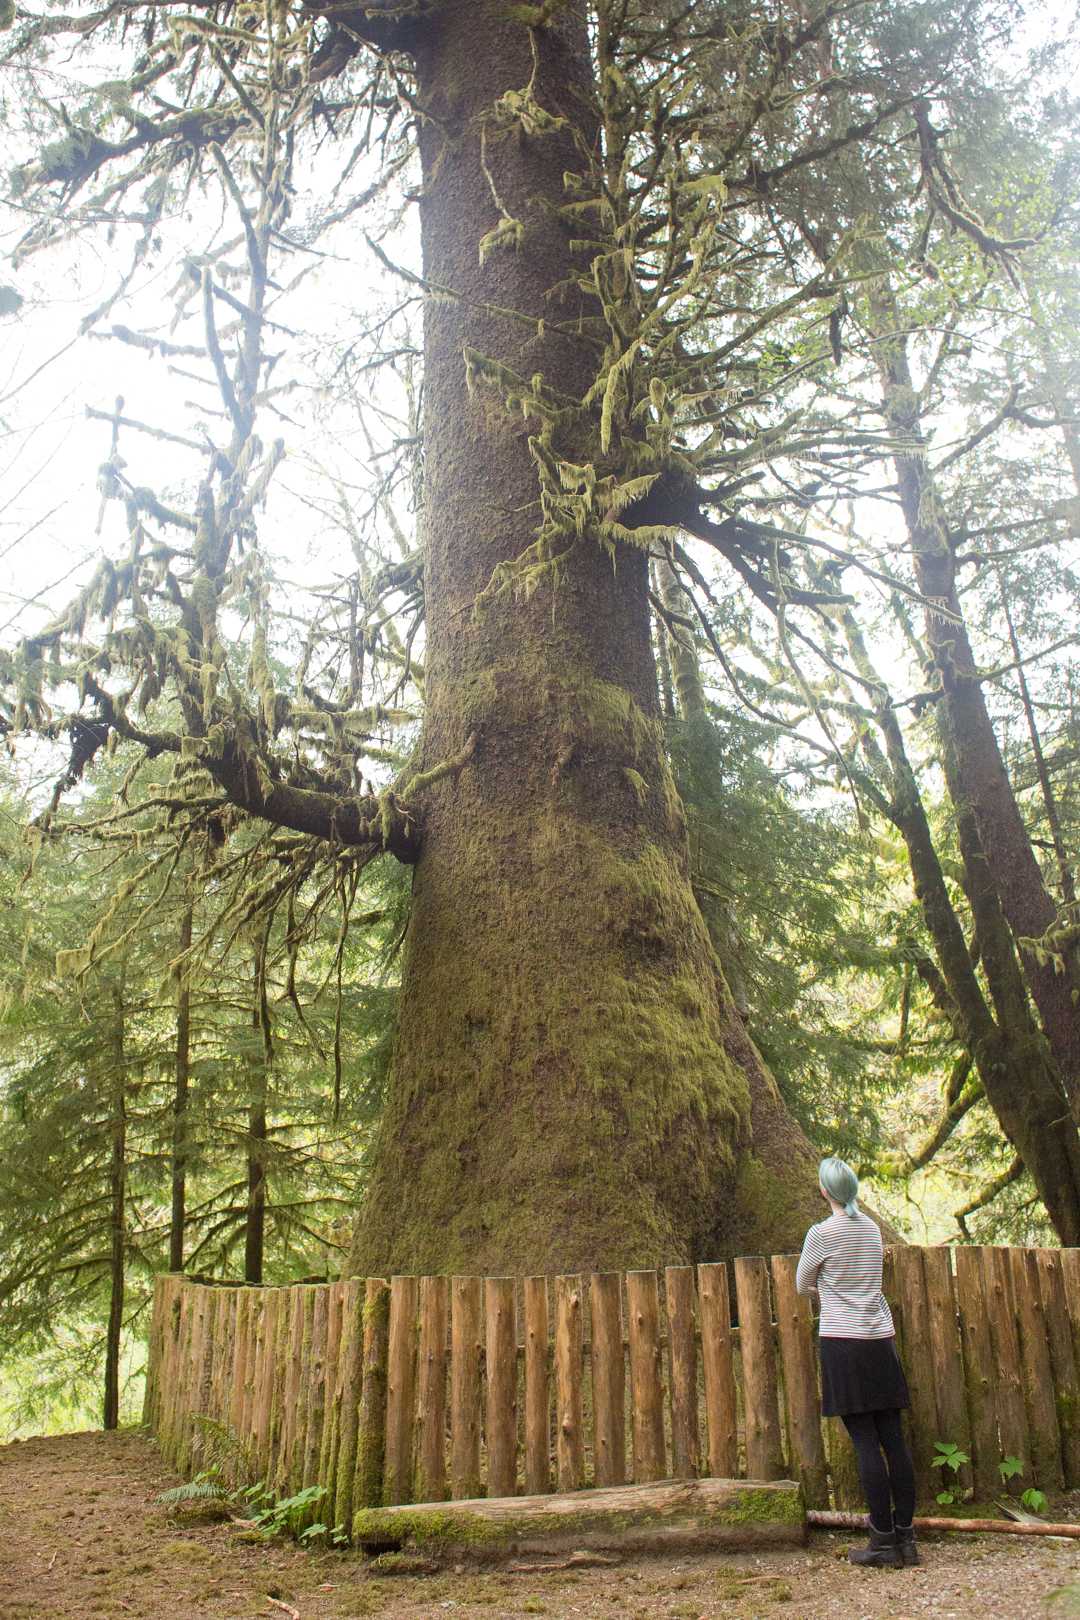 The Harris Sitka Spruce, found on the road from Port Renfrew to Lake Cowichan, on Vancouver Island